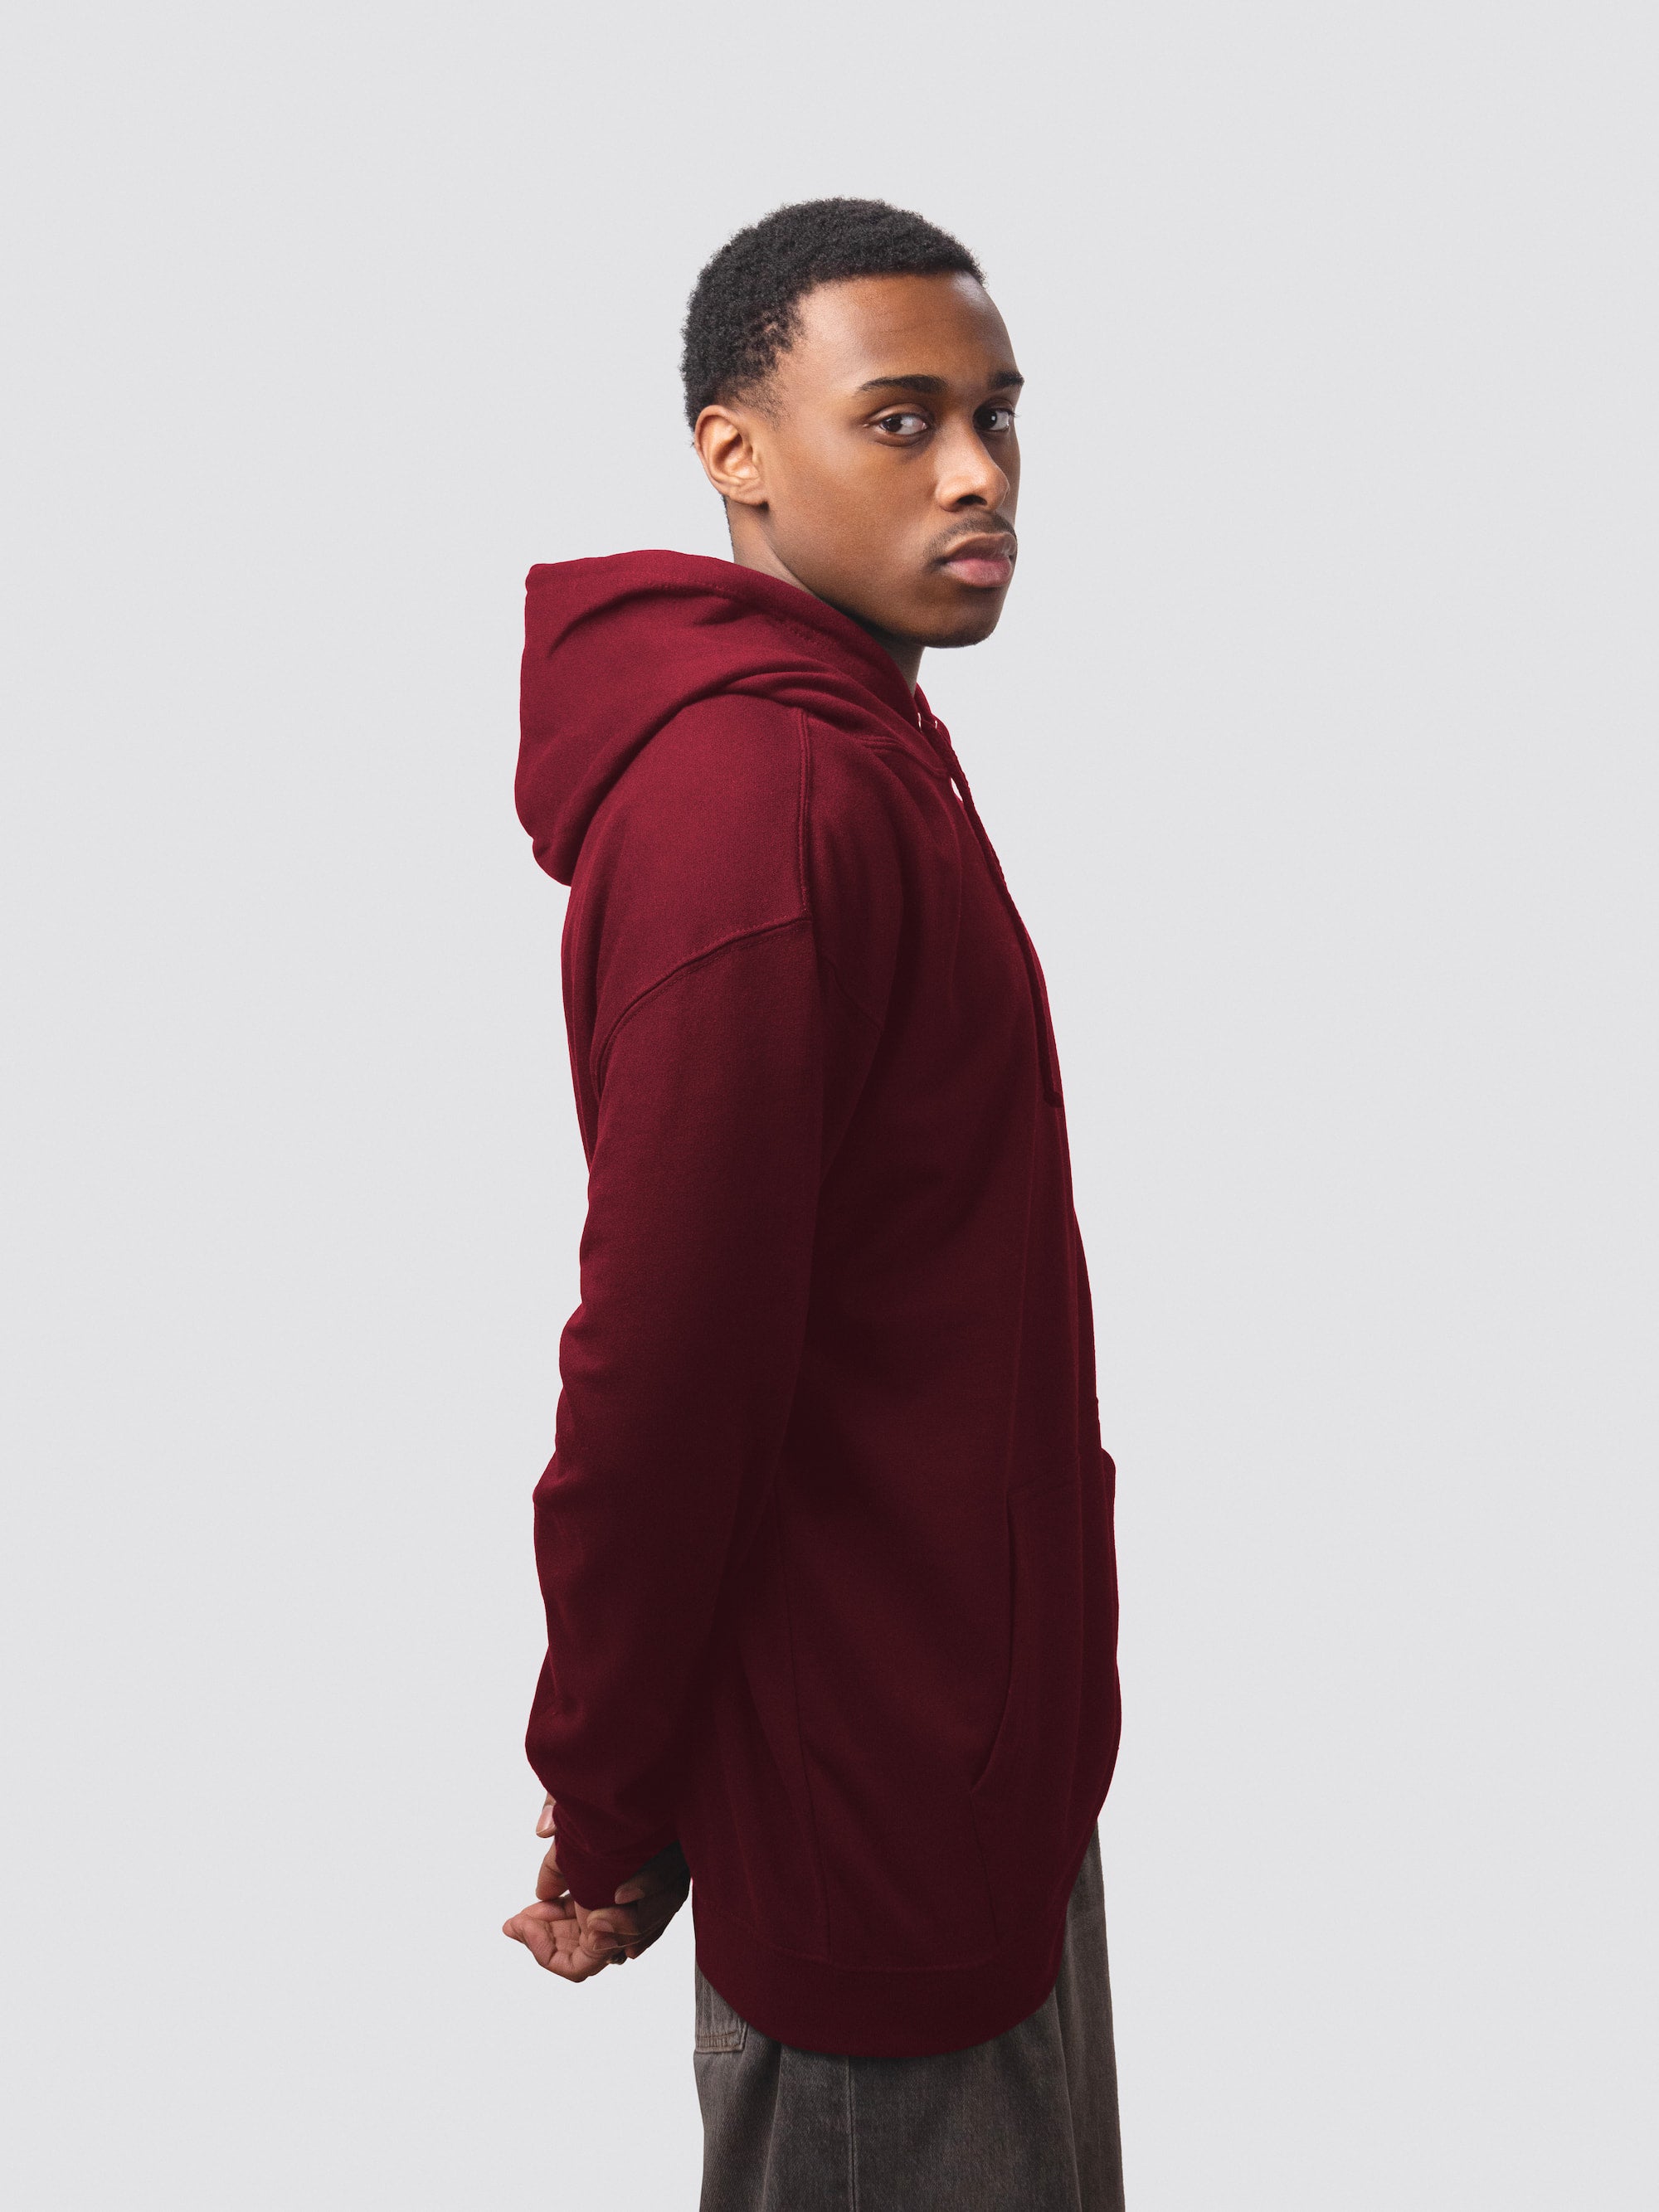 Queens' College hoodie, made from burgundy cotton-faced fabric